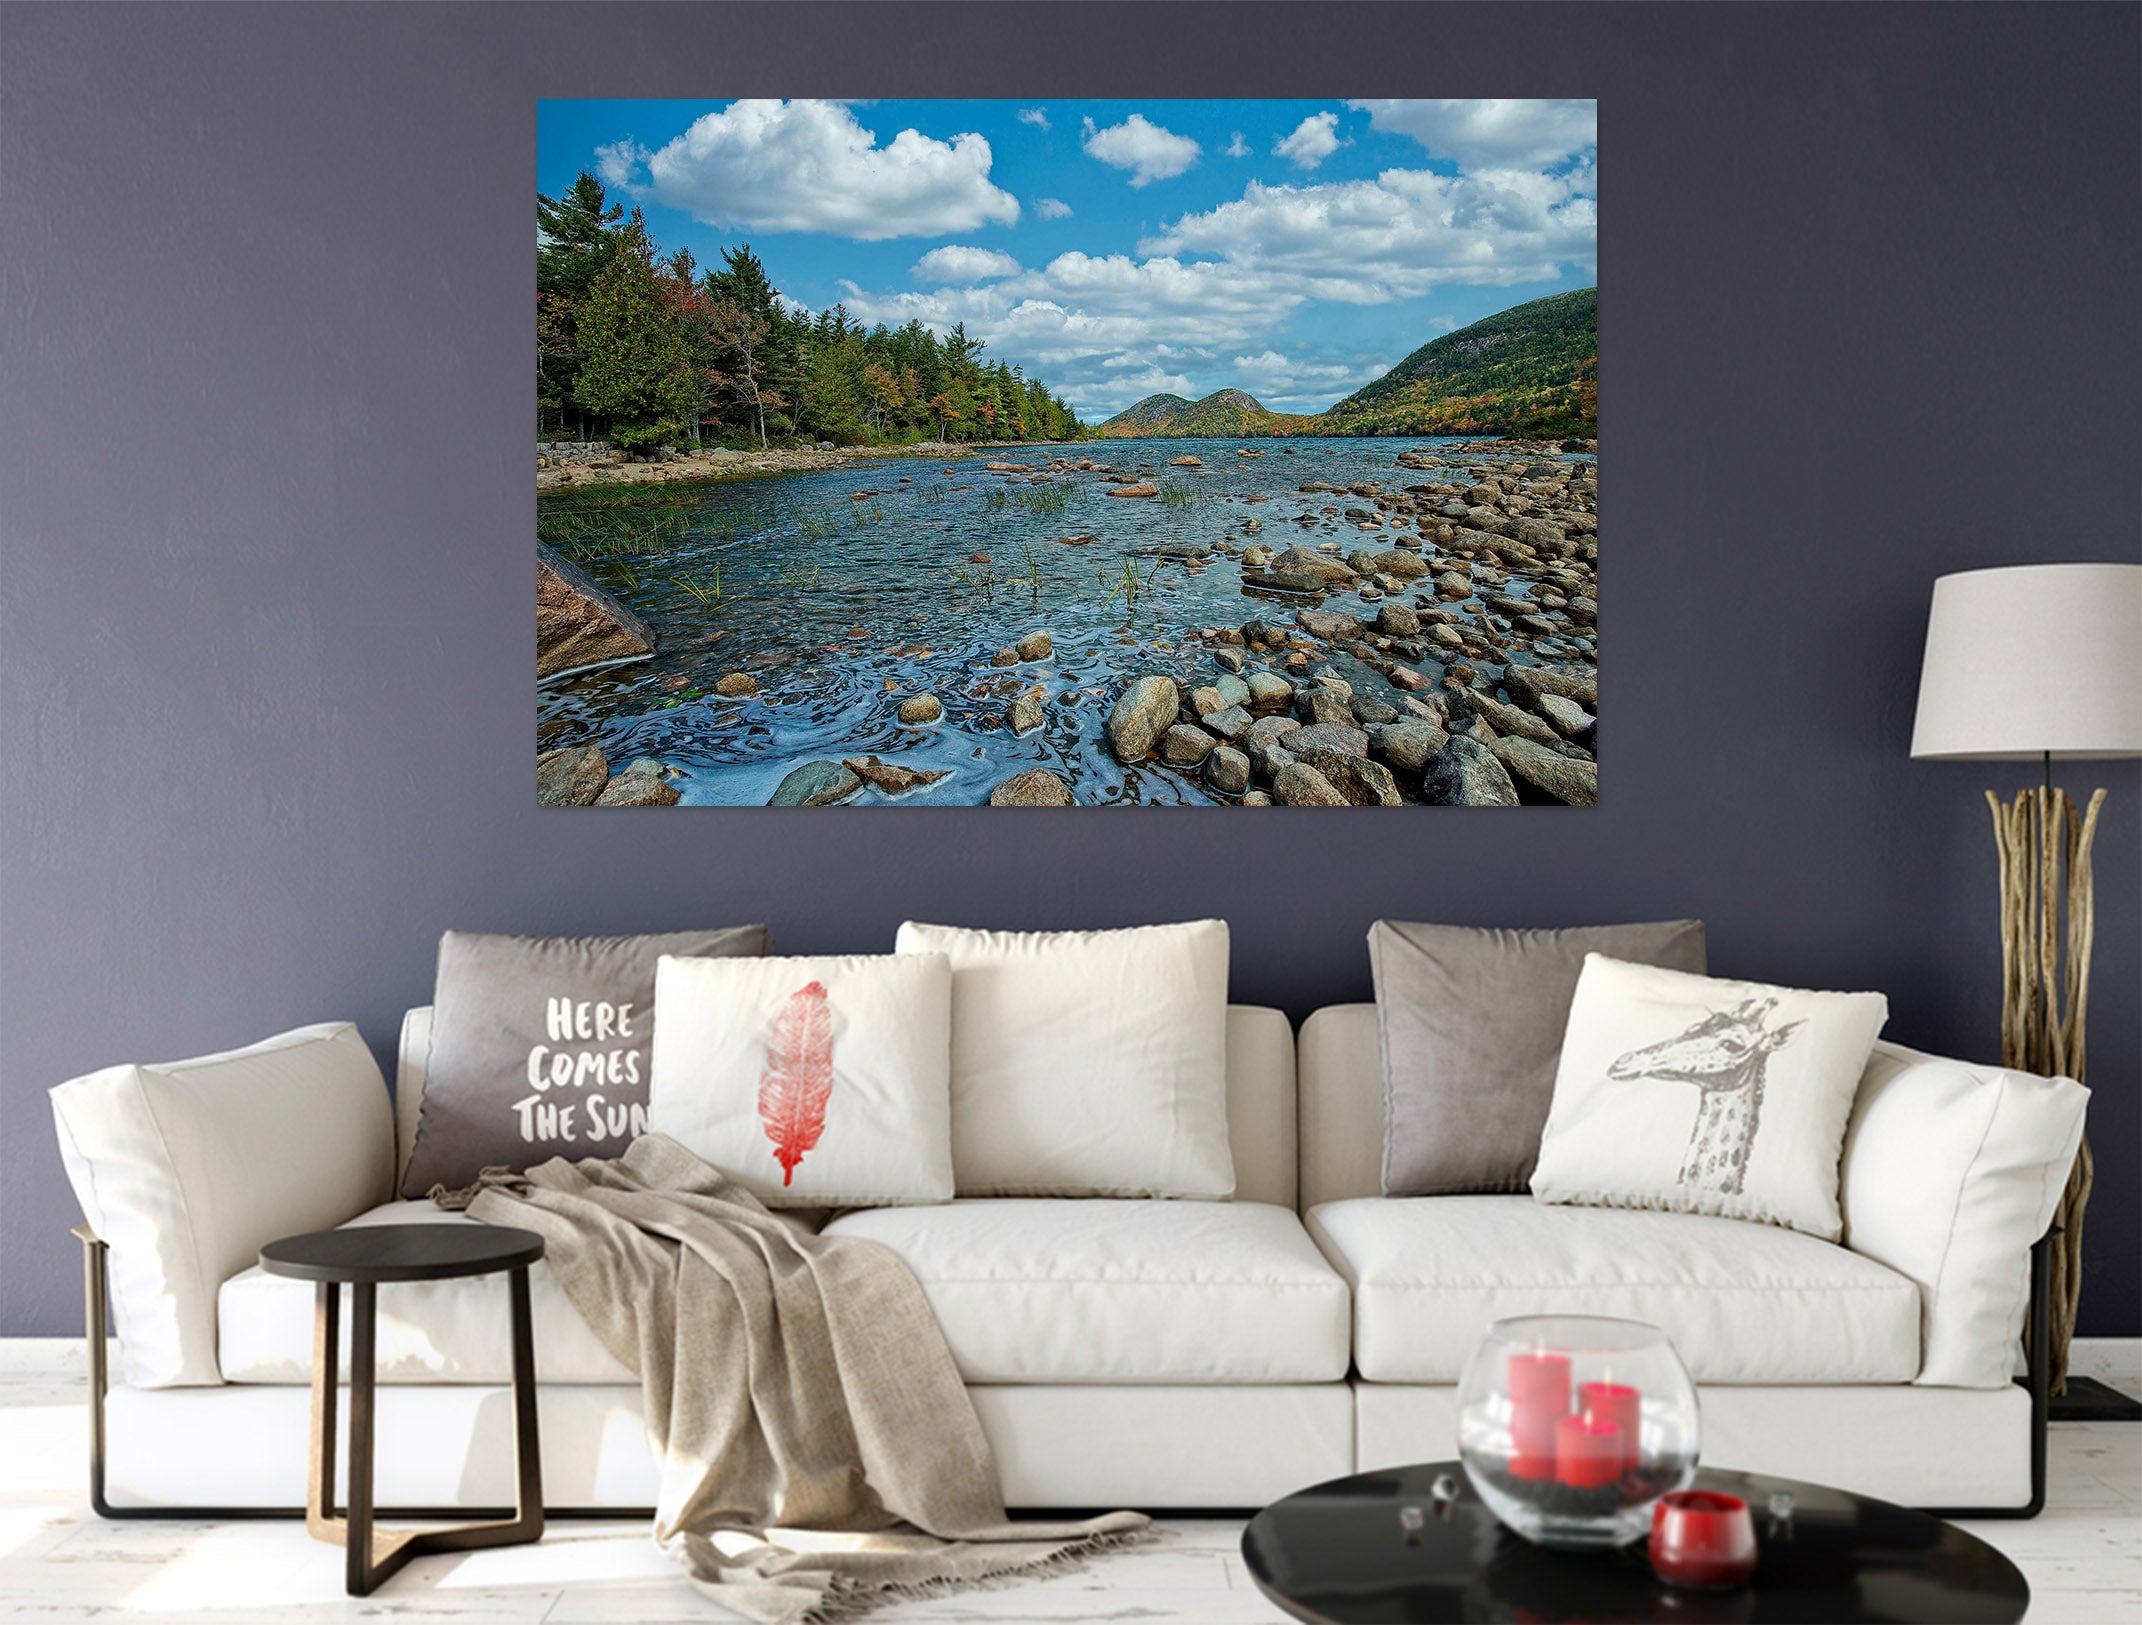 3D Stone Small River 62116 Kathy Barefield Wall Sticker